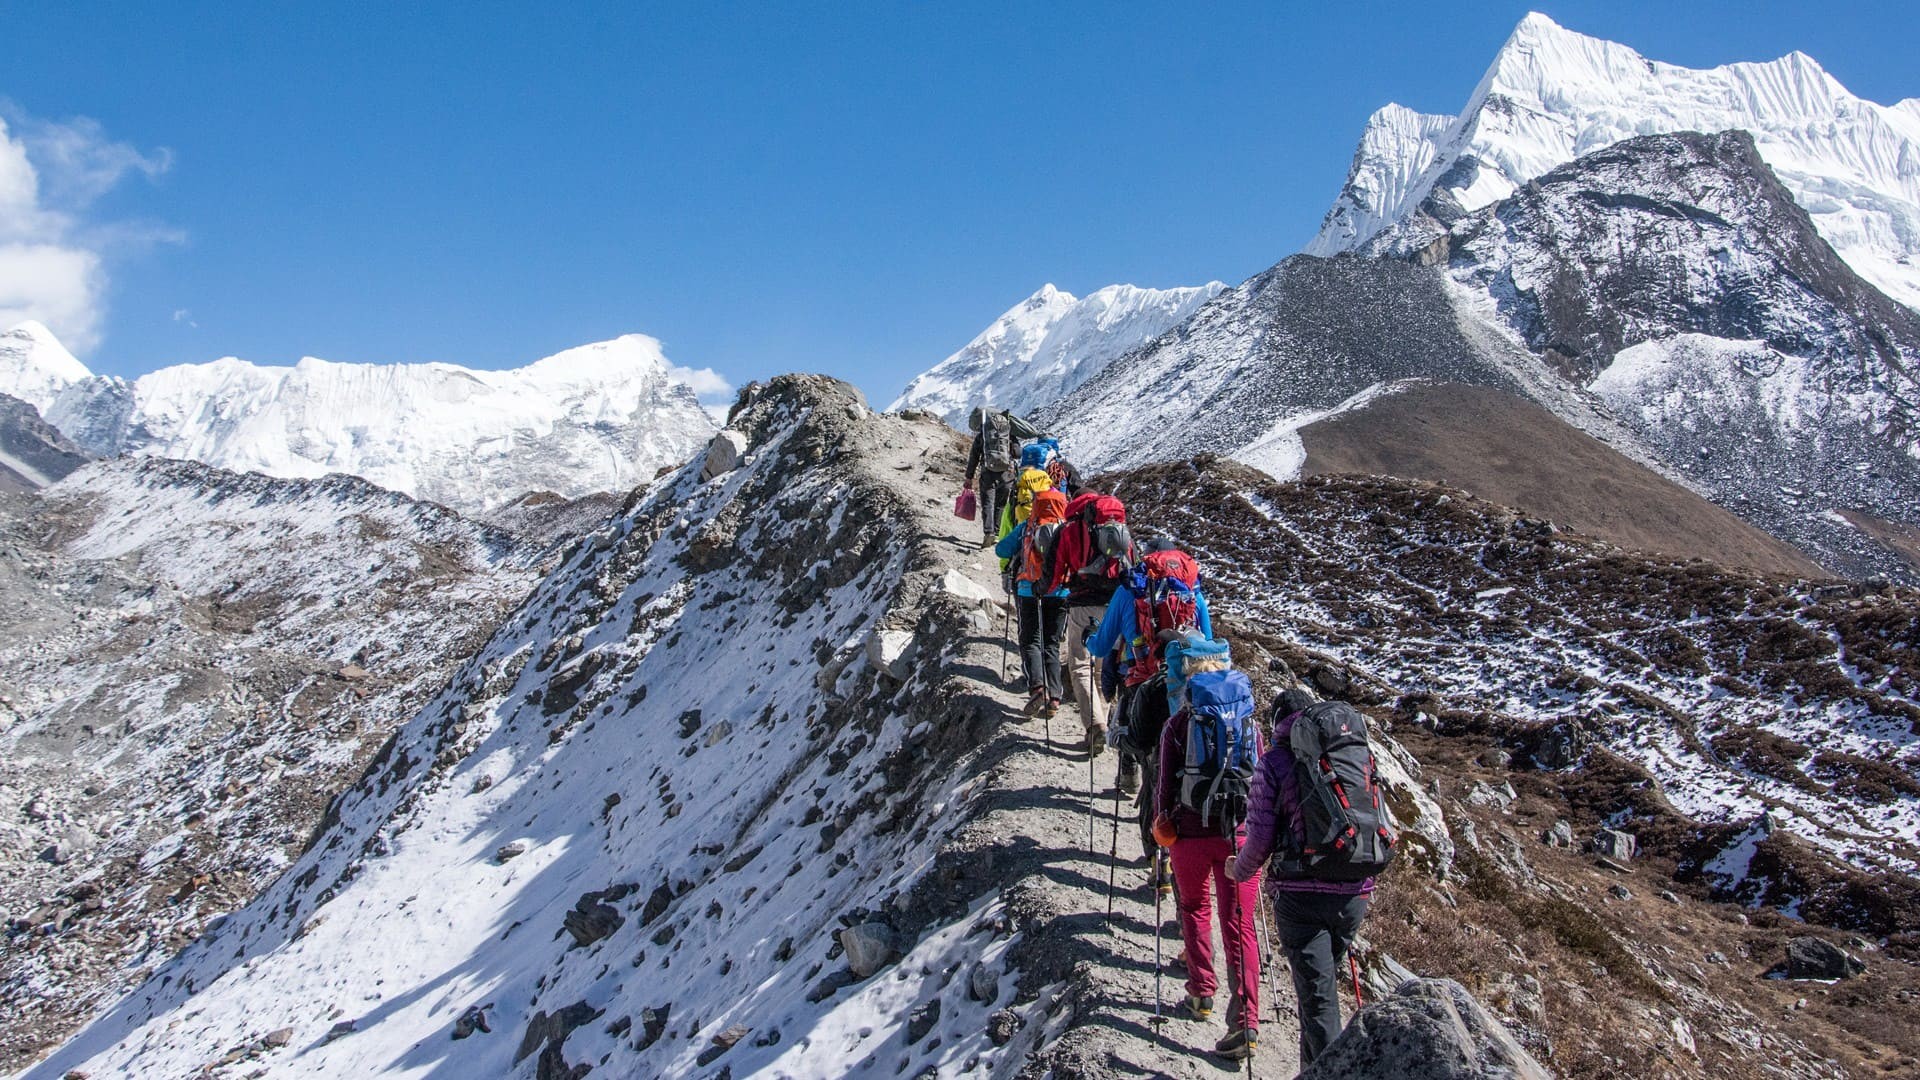 Trekking in Nepal: Tips for a safe and memorable journey